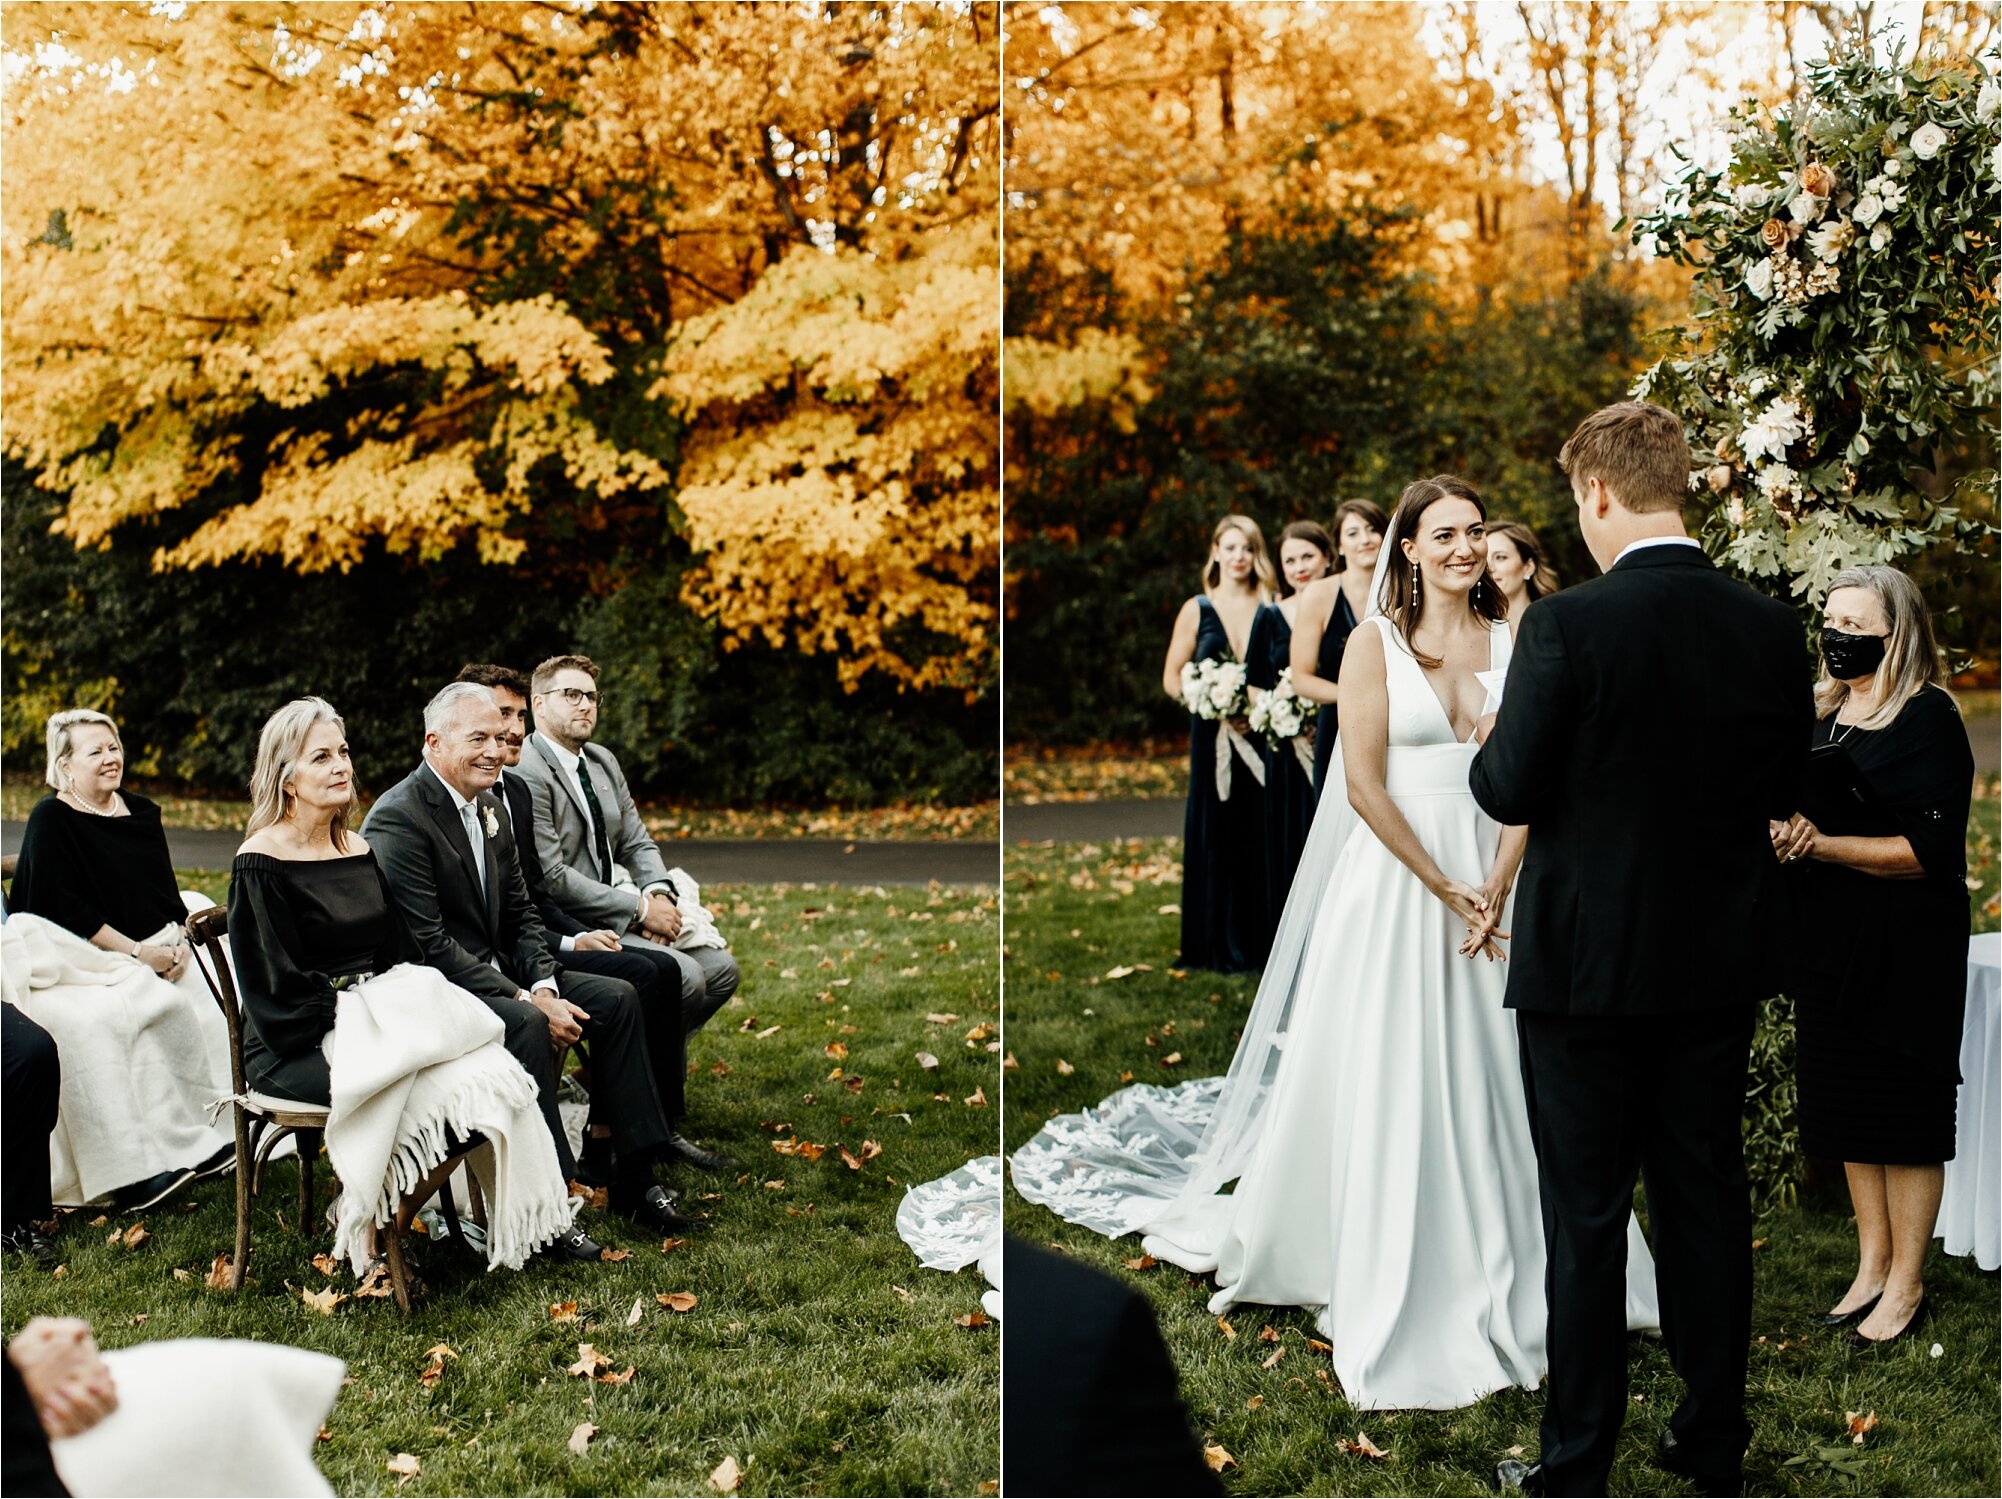  Intimate Backyard Mequon, Wisconsin Fall Wedding | MADELINE ceremony photos candid guests crying emotional day marriage  